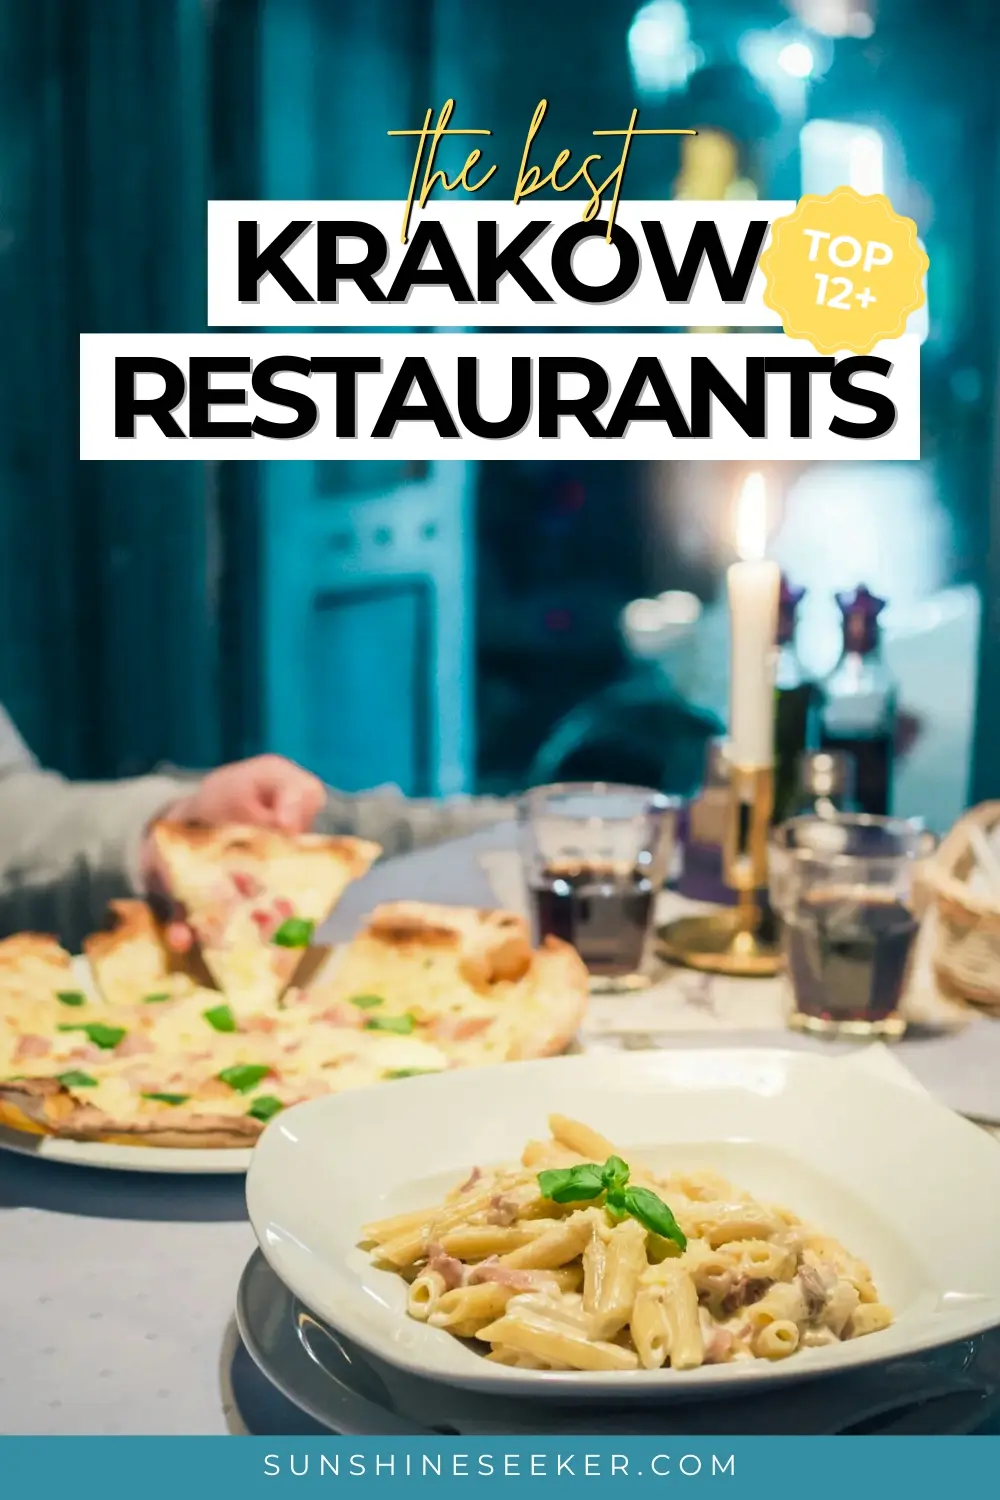 Discover the top 12 best restaurants in Krakow. From cozy Italian restaurants to Instagrammable cafés - These are the best places to eat in Krakow.